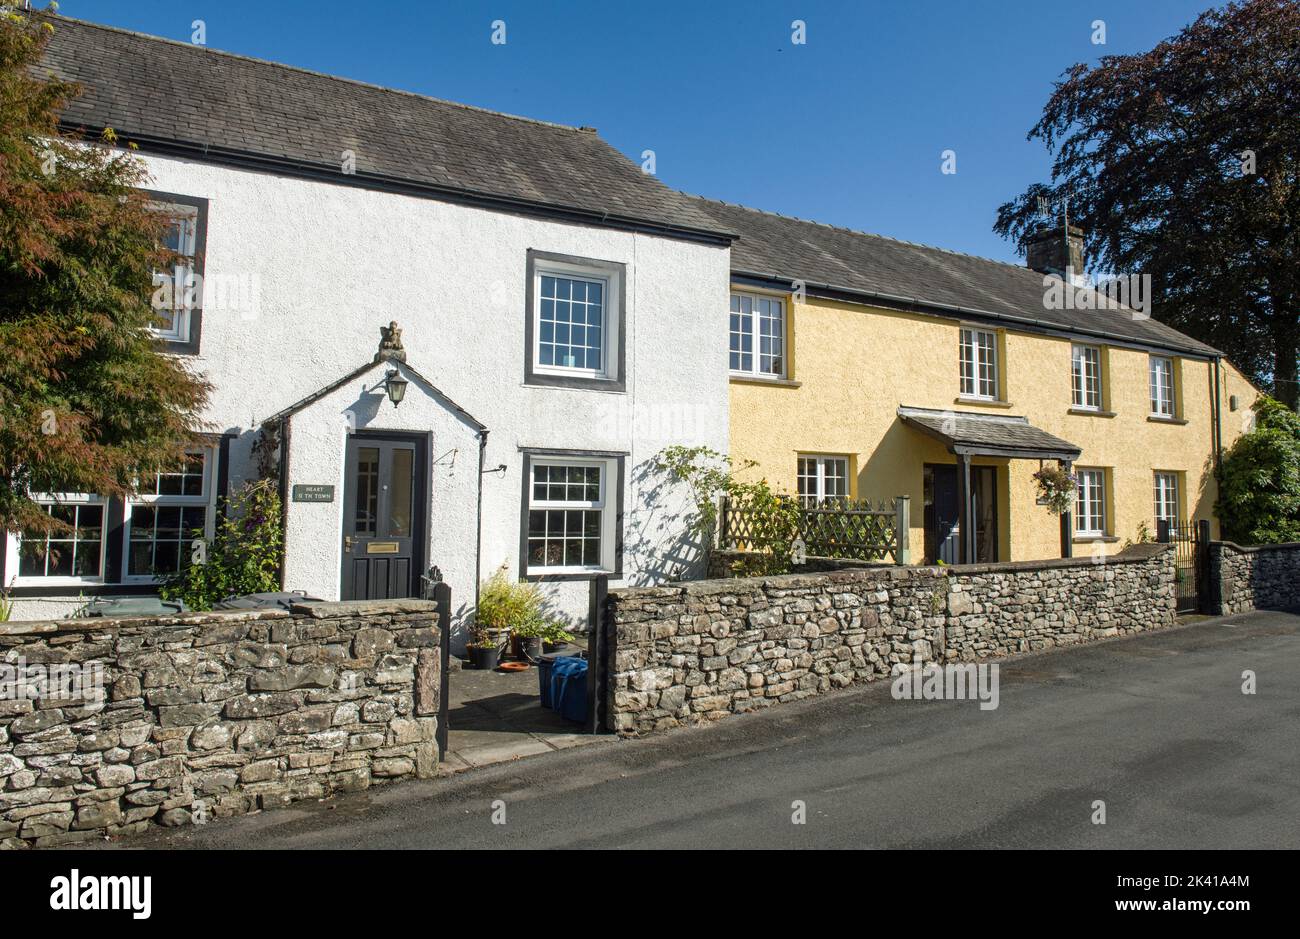 Houses in the Peaceful and delightful Cumbrian Village of Barbon Stock Photo